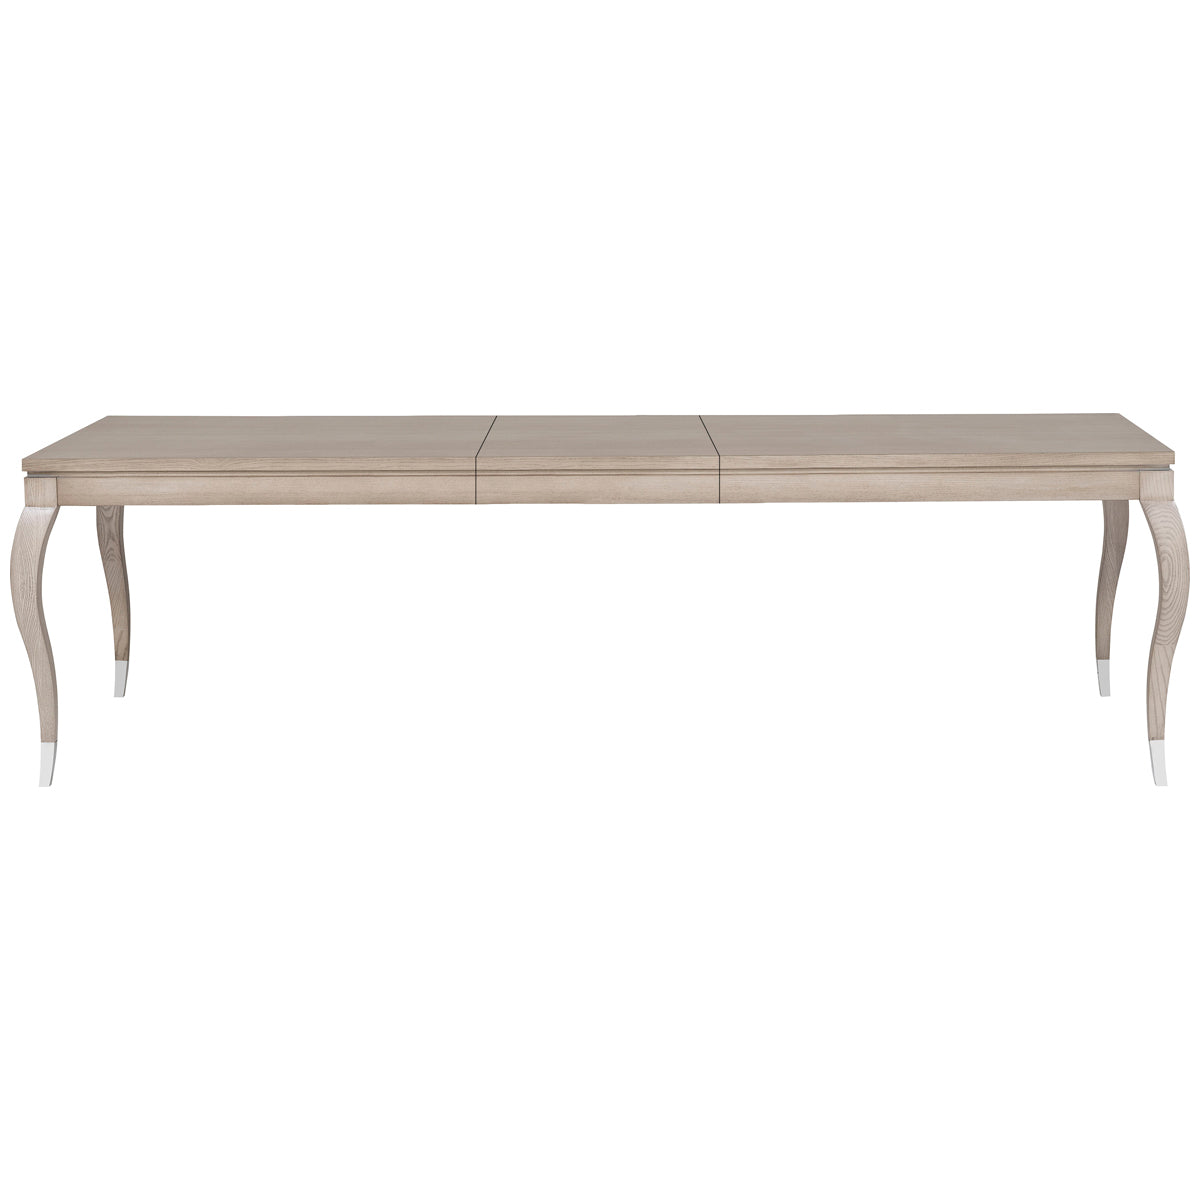 Vanguard Furniture Cabriole Dining Table with Cabriole Leg